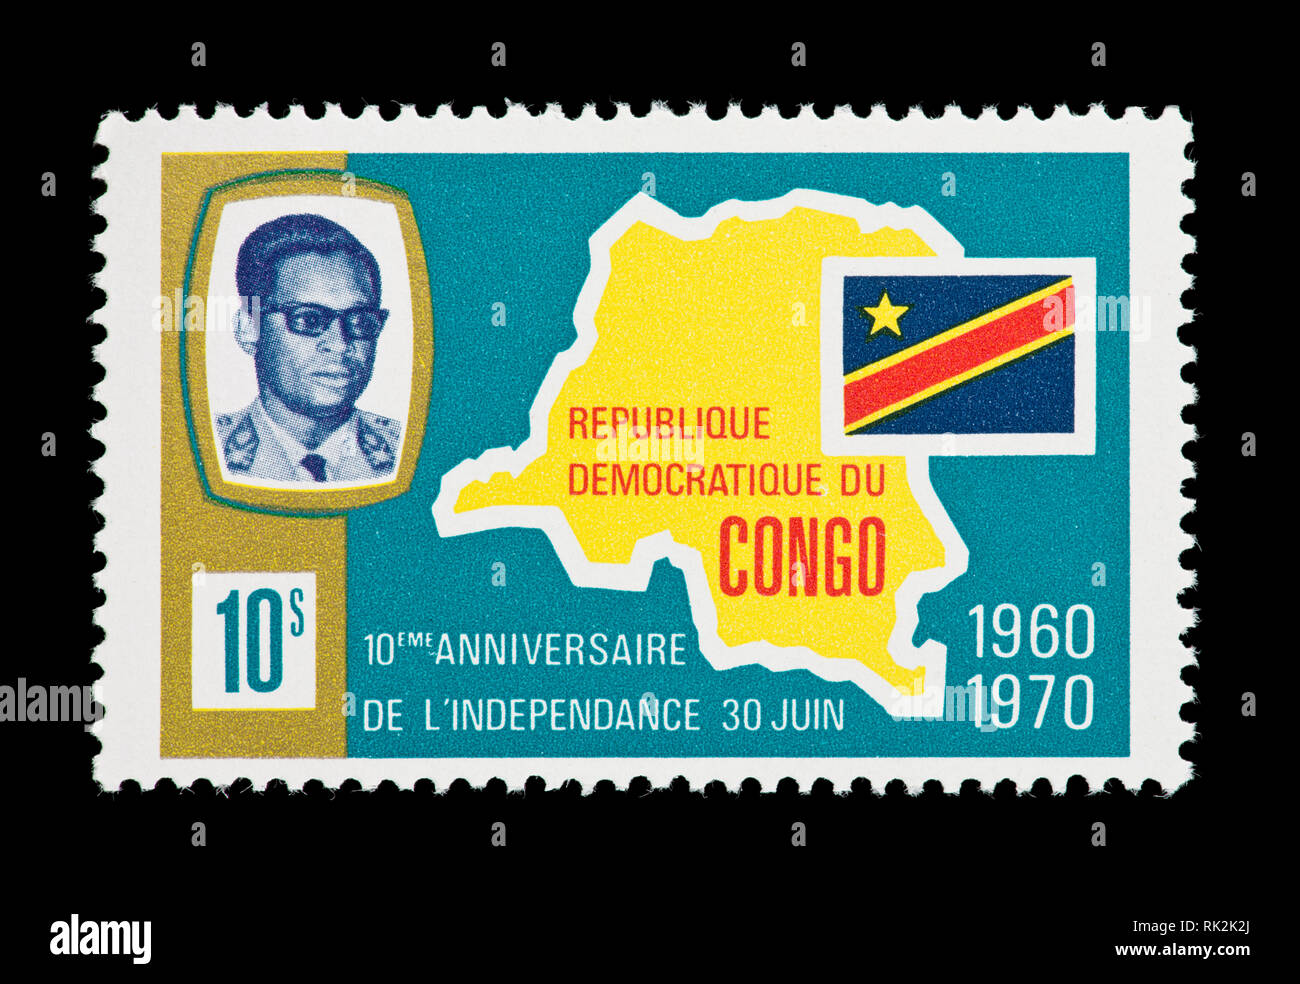 Postage stamp from Congo depicting President Mobutu and the map and flag of Congo, 10th anniversary of independence. Stock Photo